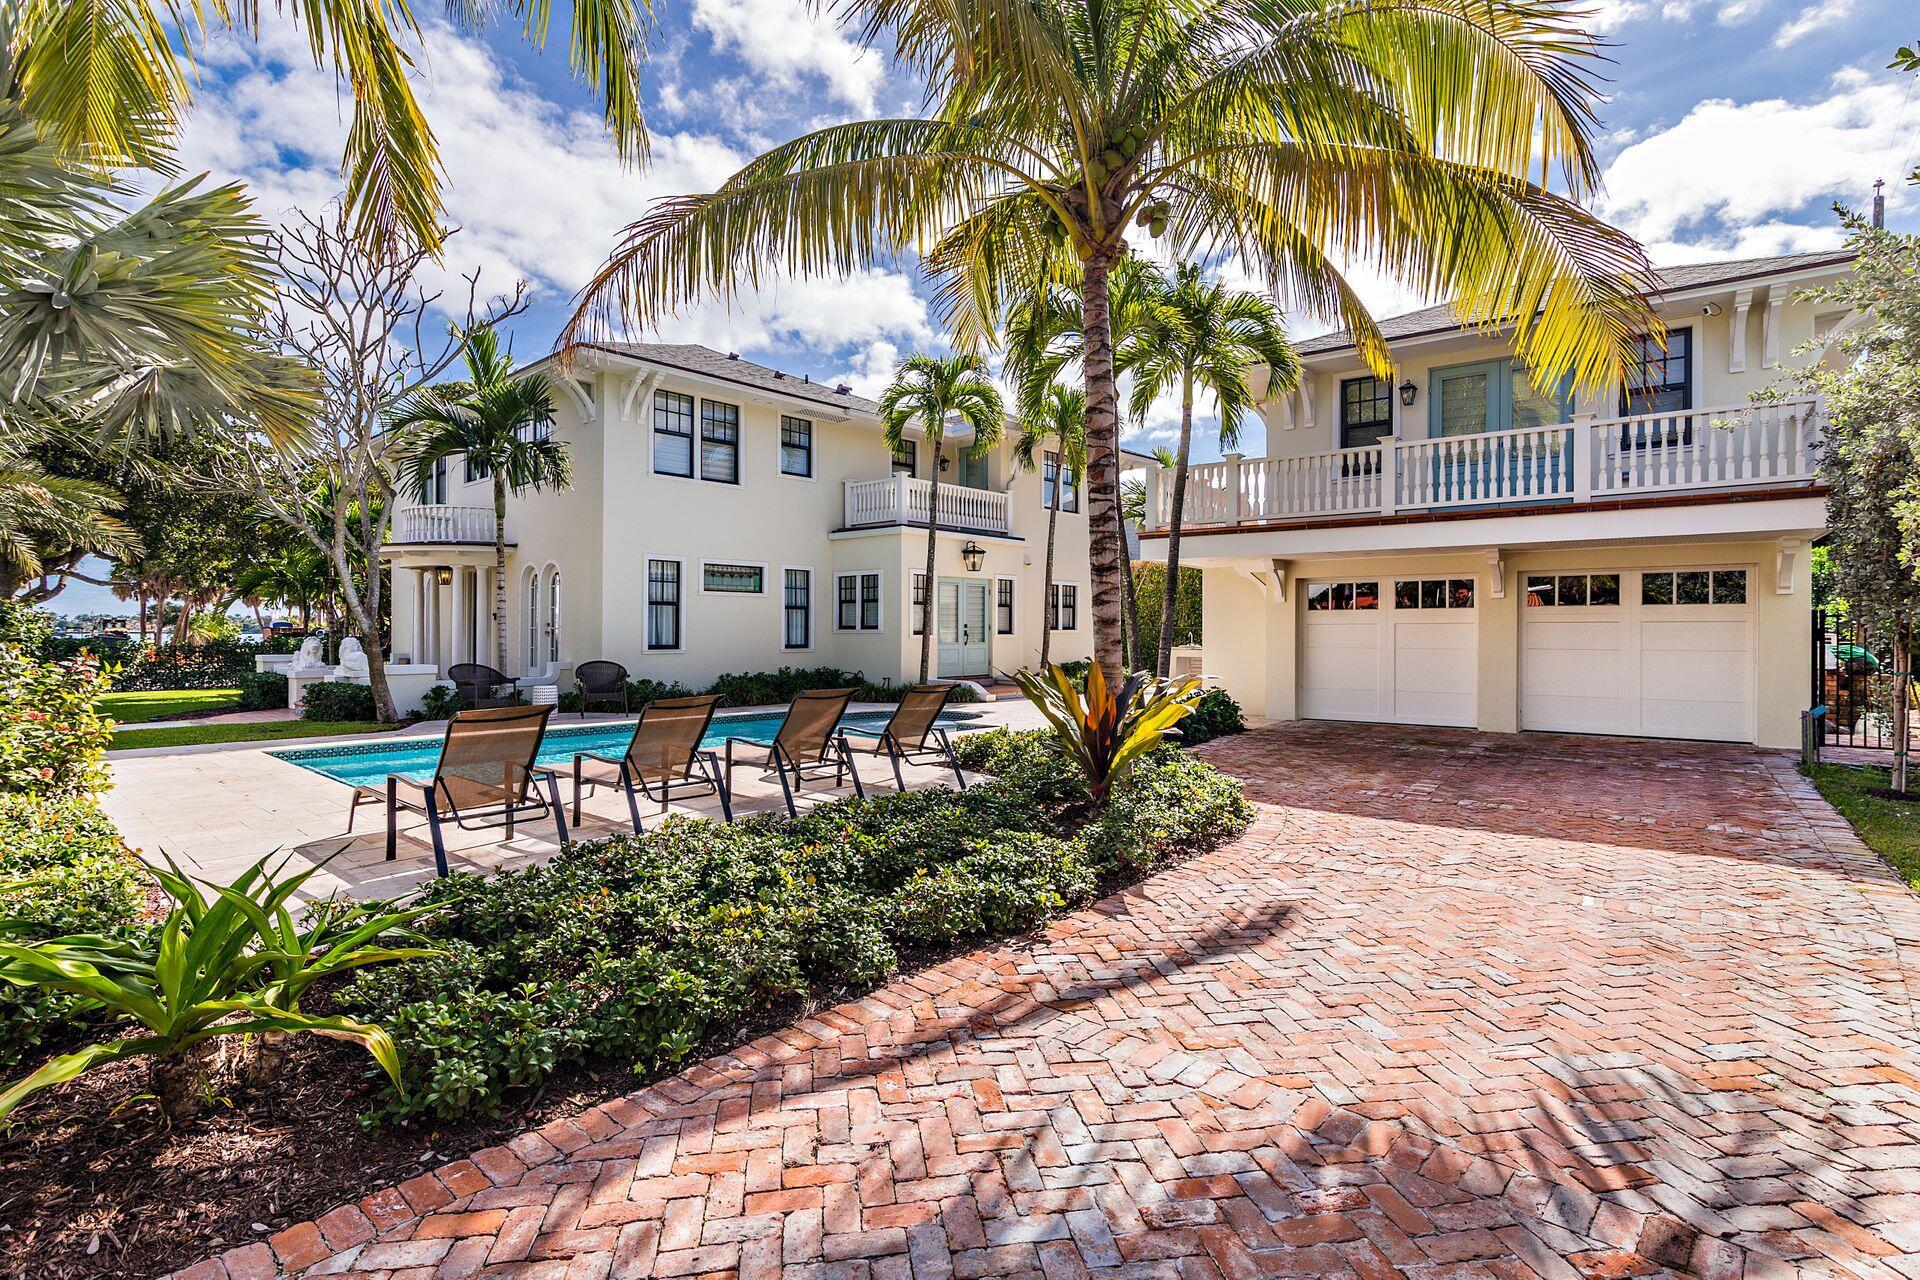 Enjoy breathtaking unobstructed Intracoastal views from this coveted Prospect Park residence. This gated estate has been fully and thoughtfully renovated and expanded. Situated on an +\- 11,326 sqft lot, this home offers 3bdrm and 3.5bths in the main house in addition to a separate Guest apartment. The kitchen is a Chefs dream, appointed with Wolf range and Subzero refrigerator, custom cabinetry and an oversized quartz island. The primary suite is a sanctuary, including beamed ceilings, private east facing balcony and a luxurious master bath. Enjoy Florida living at its finest with a resort style heated pool and built-in grill. Additional features include air conditioned 2car garage, fully automated Lutron system, full house Generac generator and custom security system.